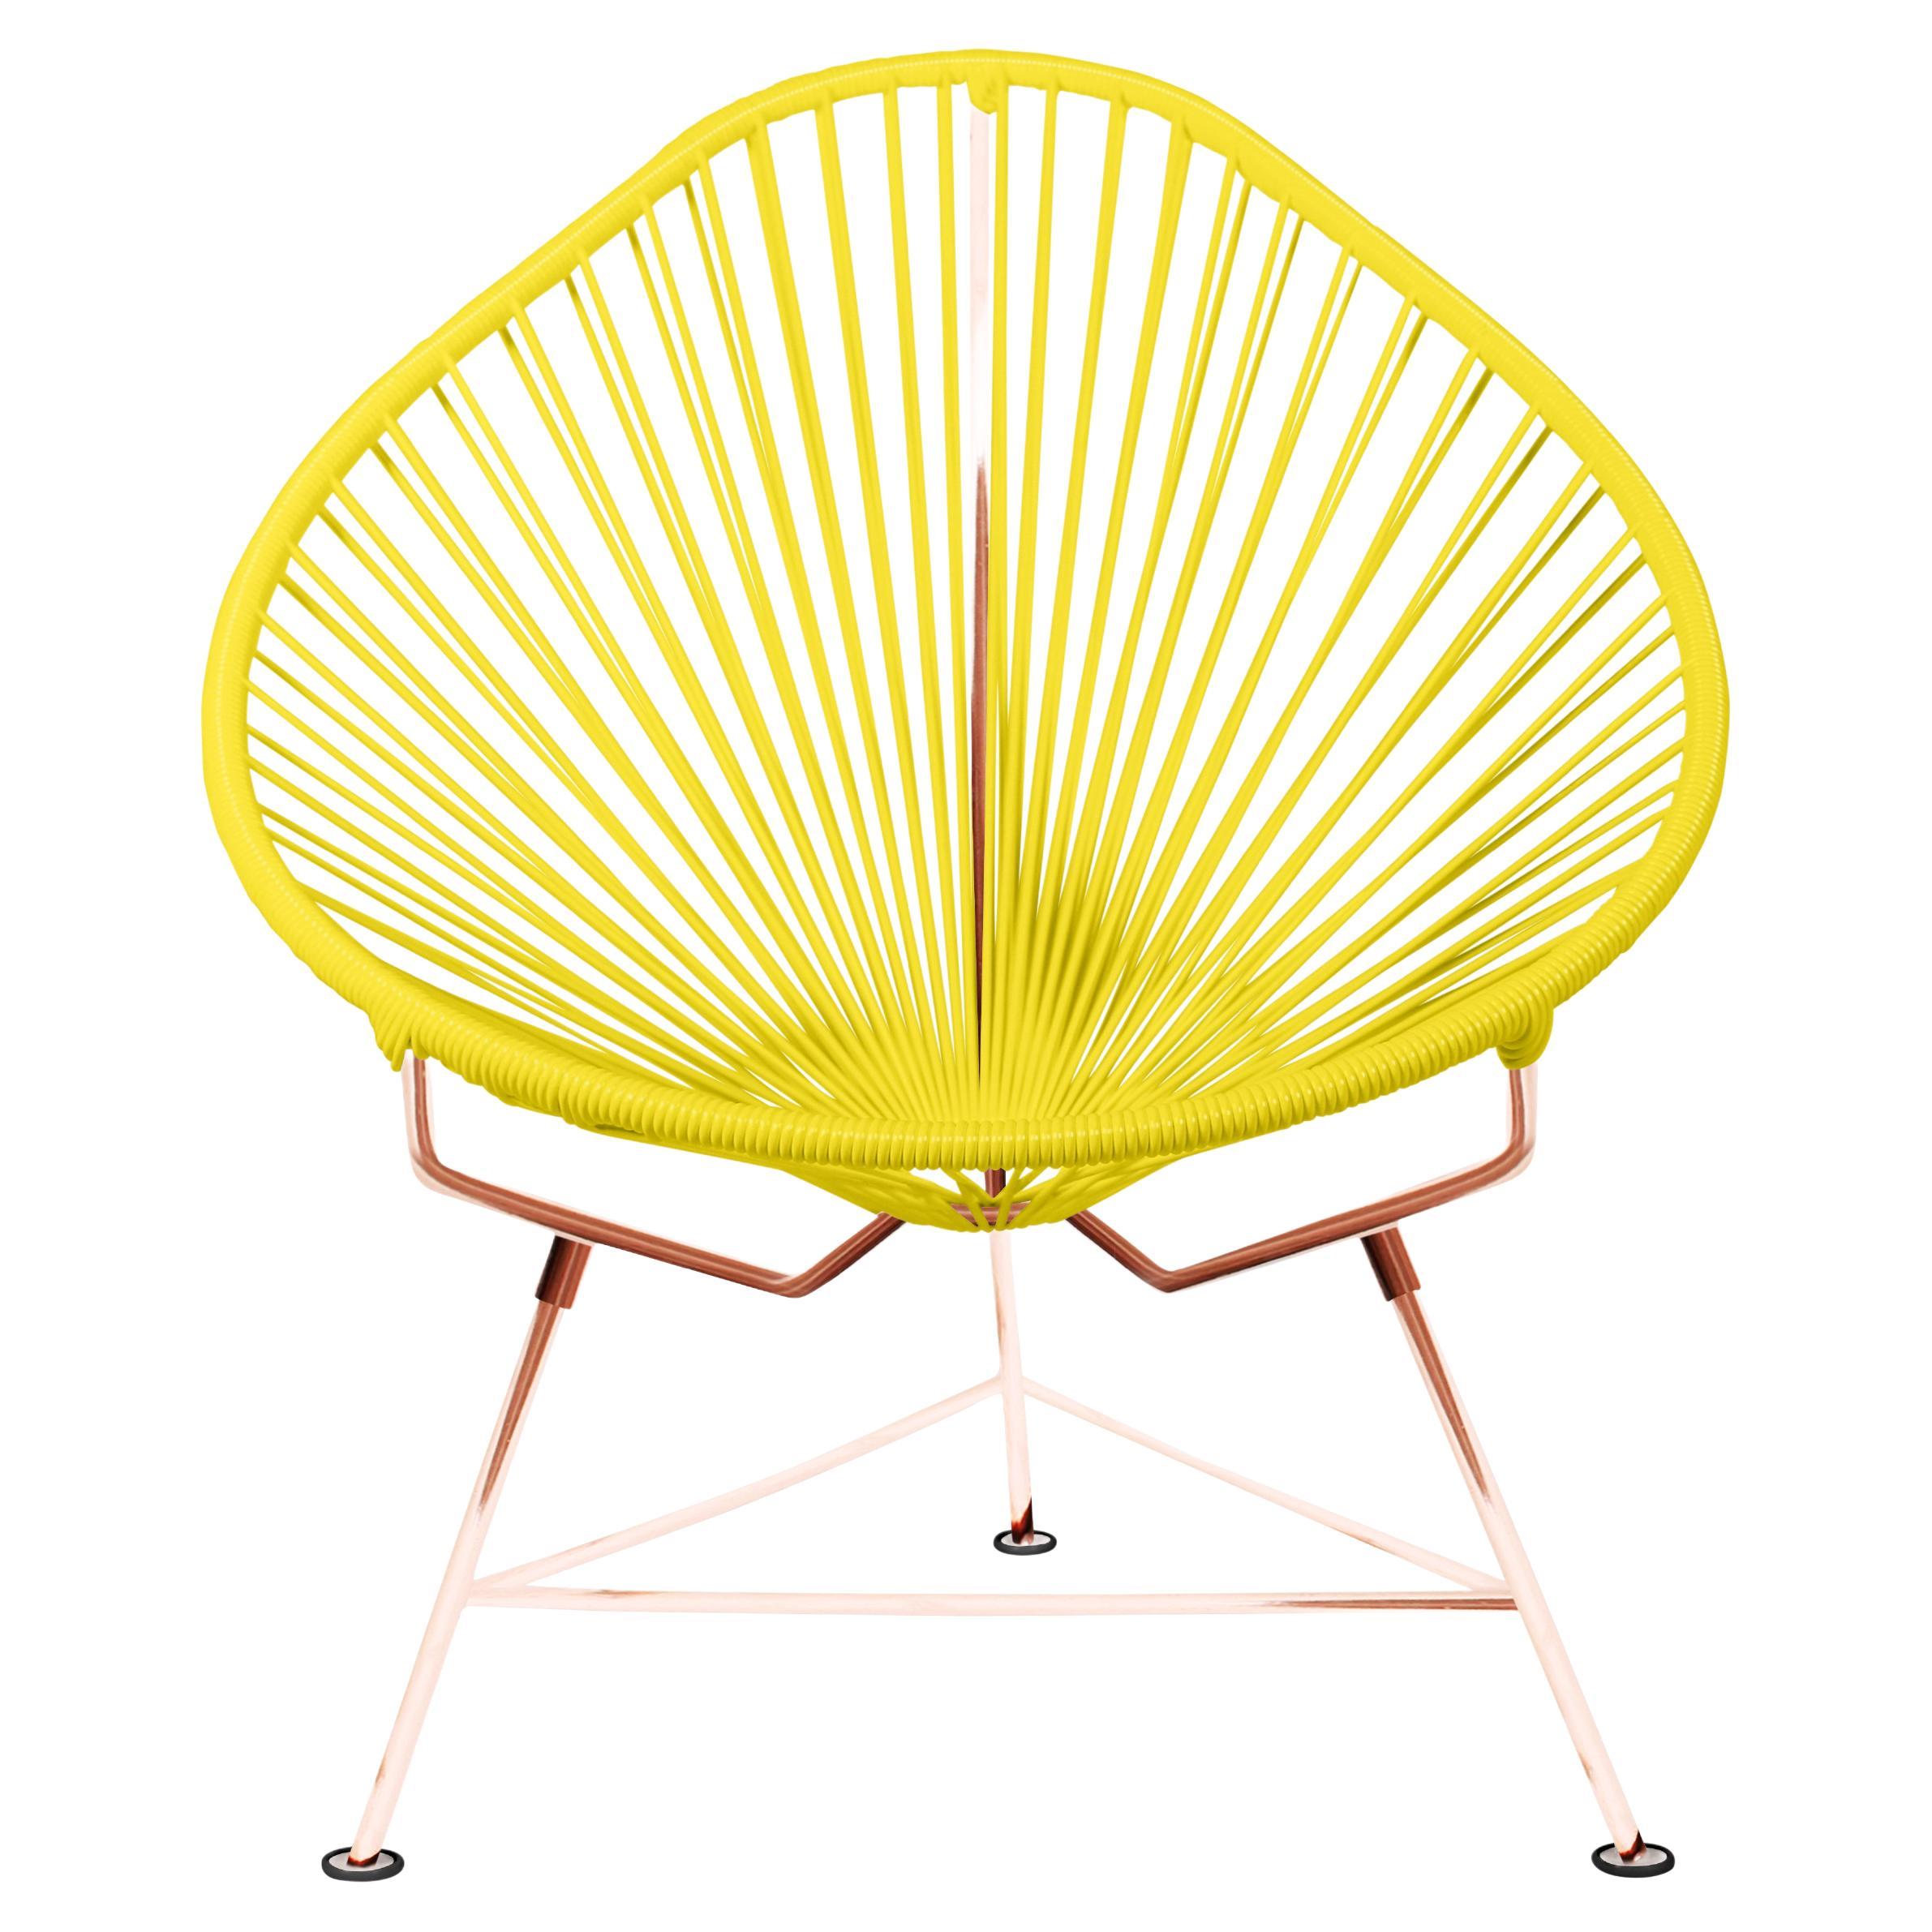 Innit Designs Acapulco Chair Yellow Weave on Copper Frame